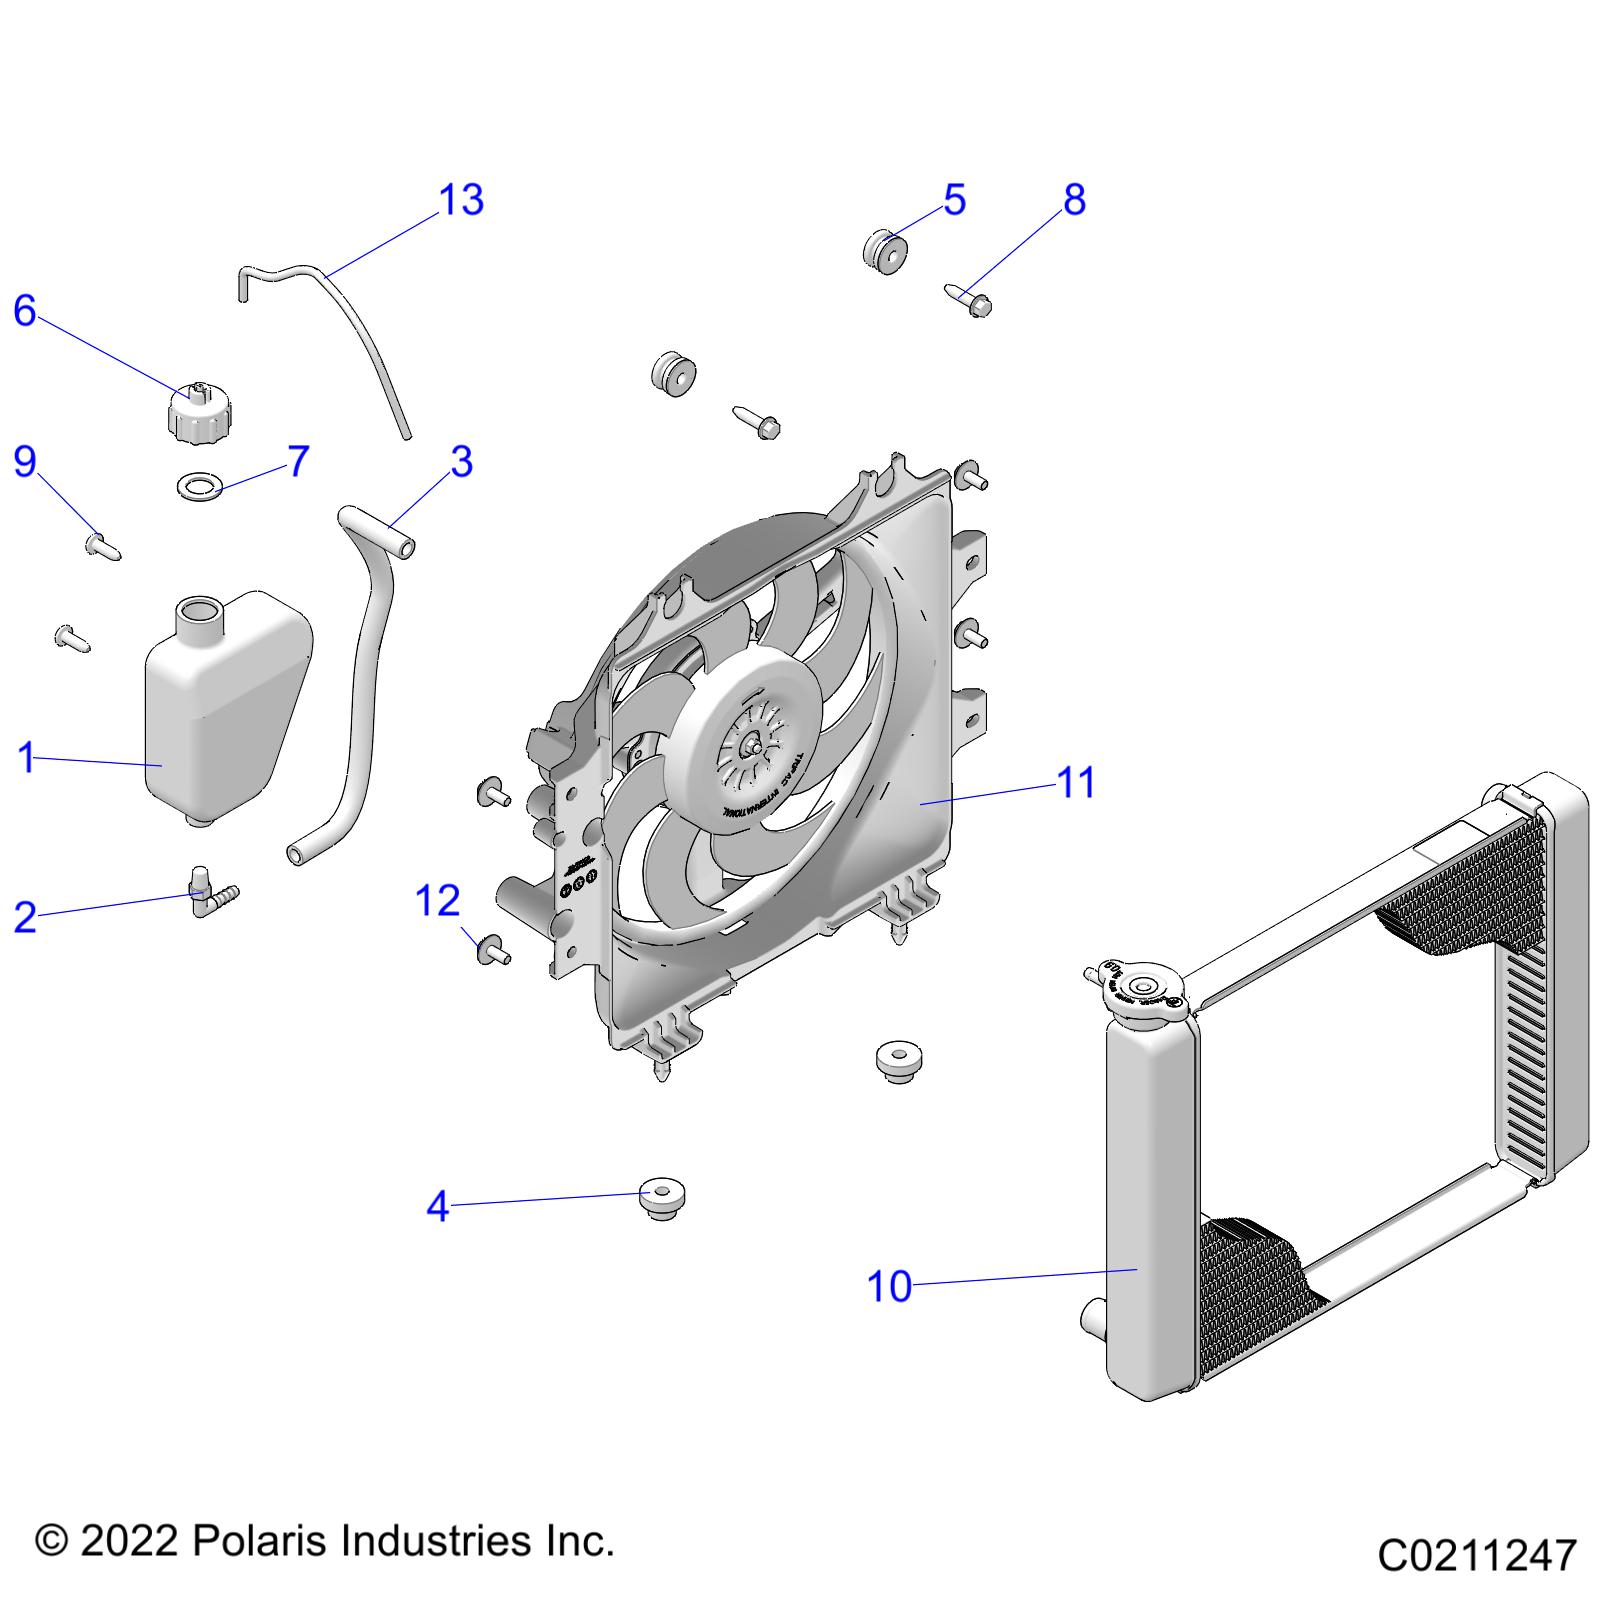 Part Number : 2415473 ASM-FAN AND MOTOR TRIPAC SGL